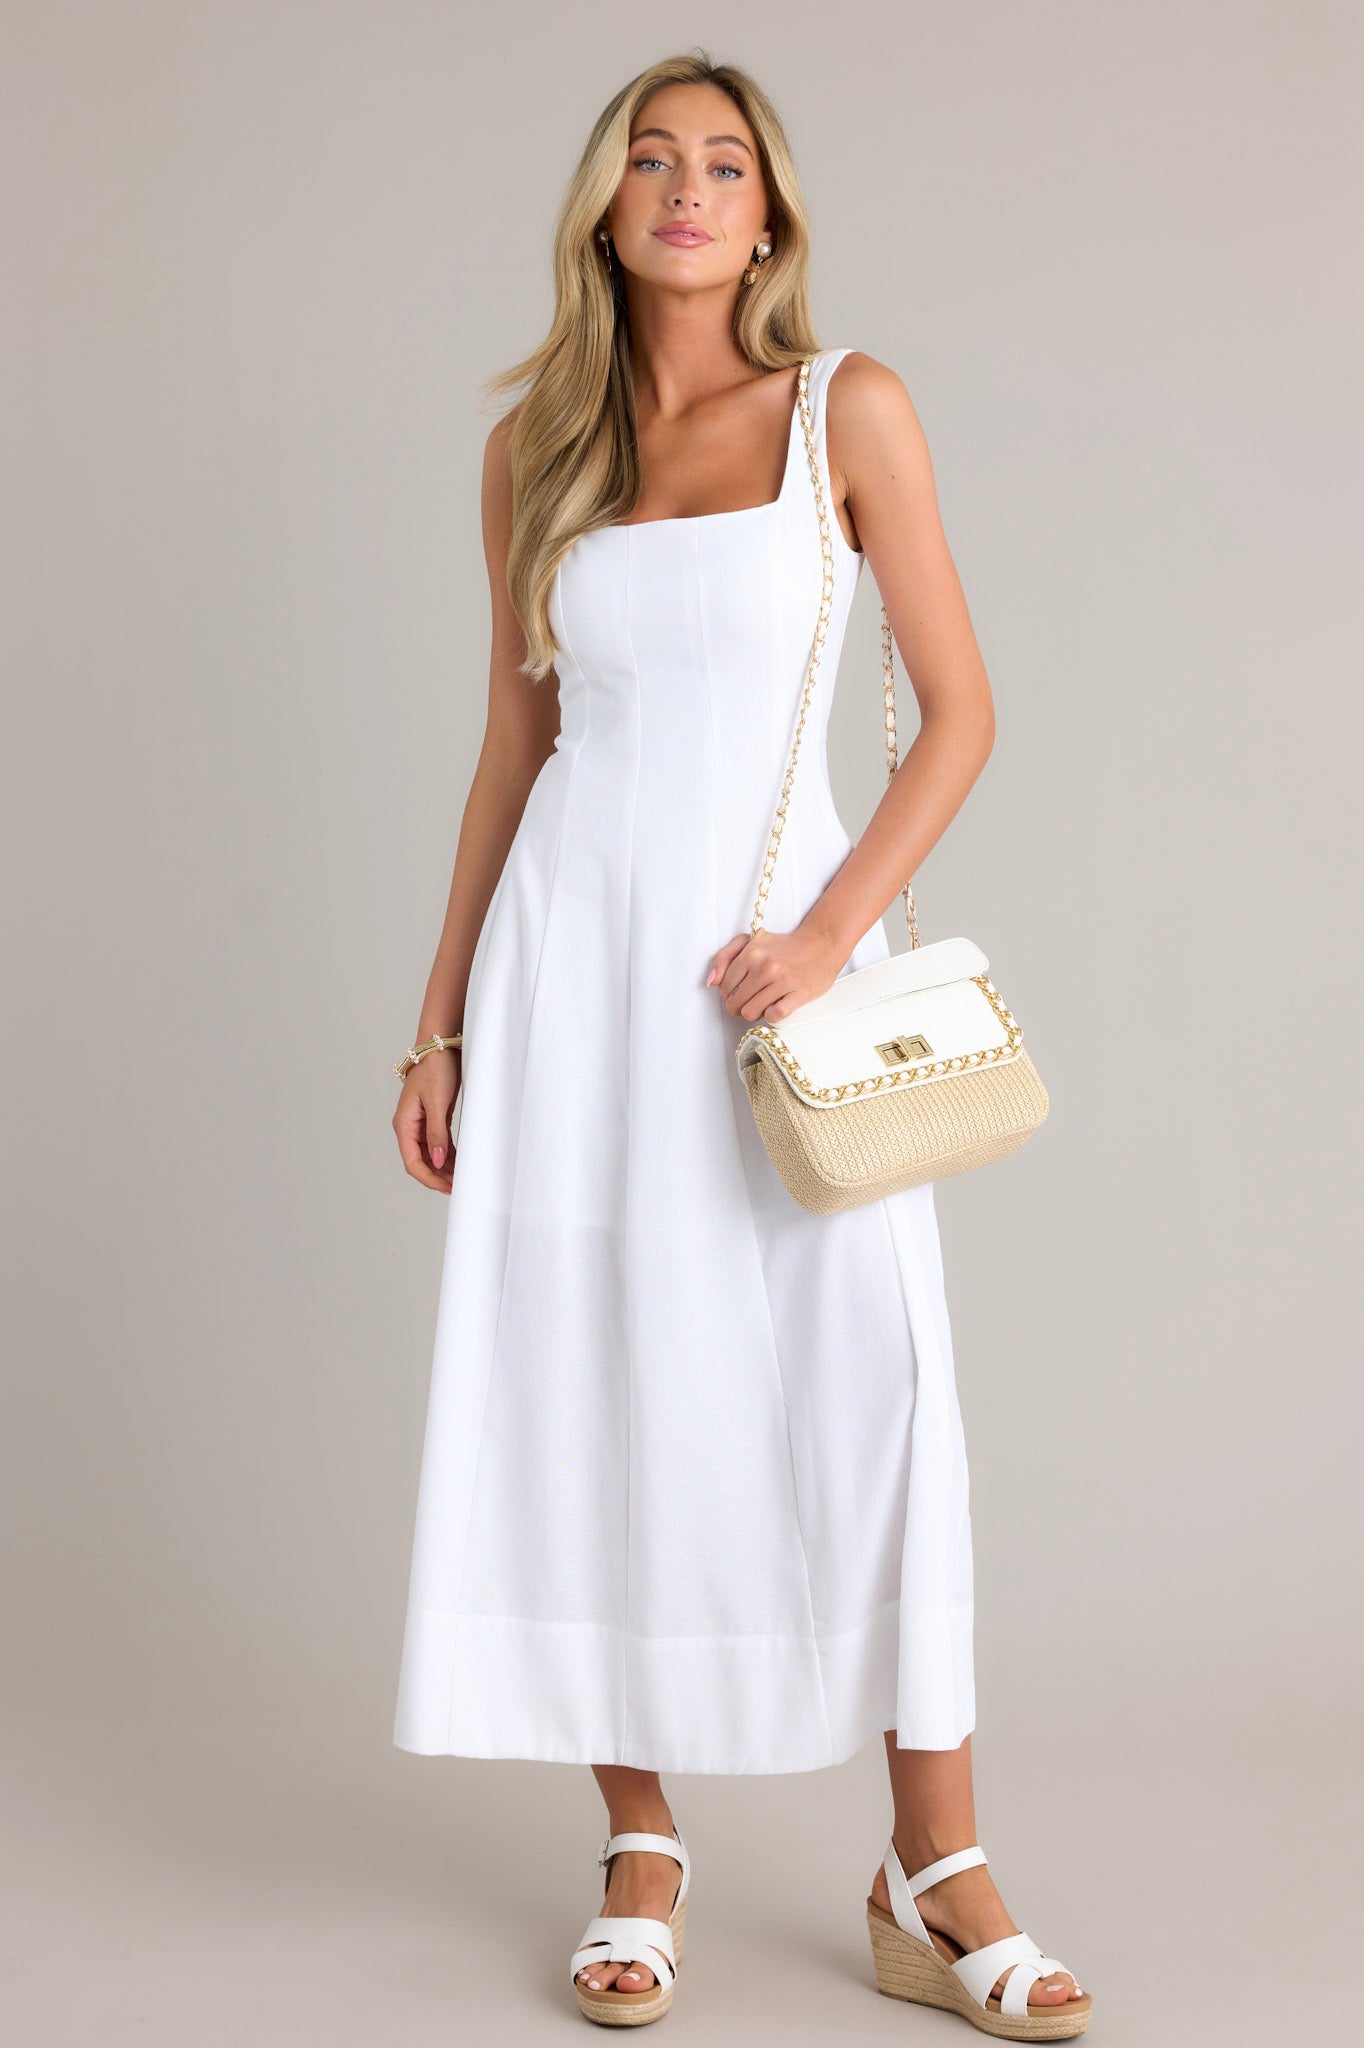 Action shot of a white maxi dress displaying the fit and movement, highlighting the square neckline, thick straps, flowing silhouette, and thick hemline.